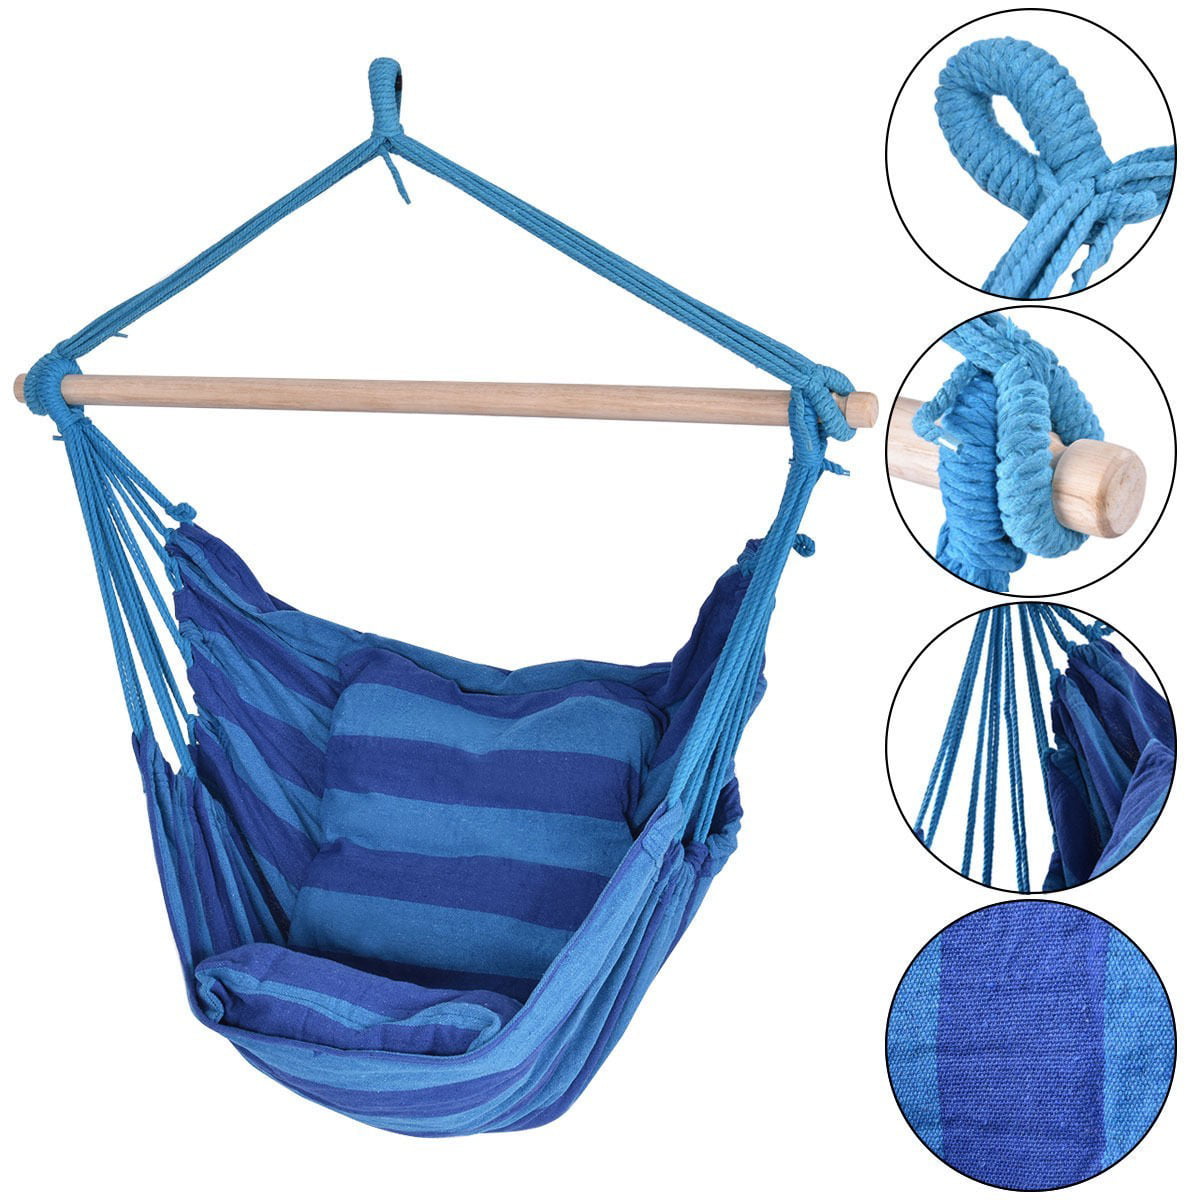 Blue Deluxe Hammock Rope Chair Patio Porch Yard Tree Hanging Air Swing Outdoor 